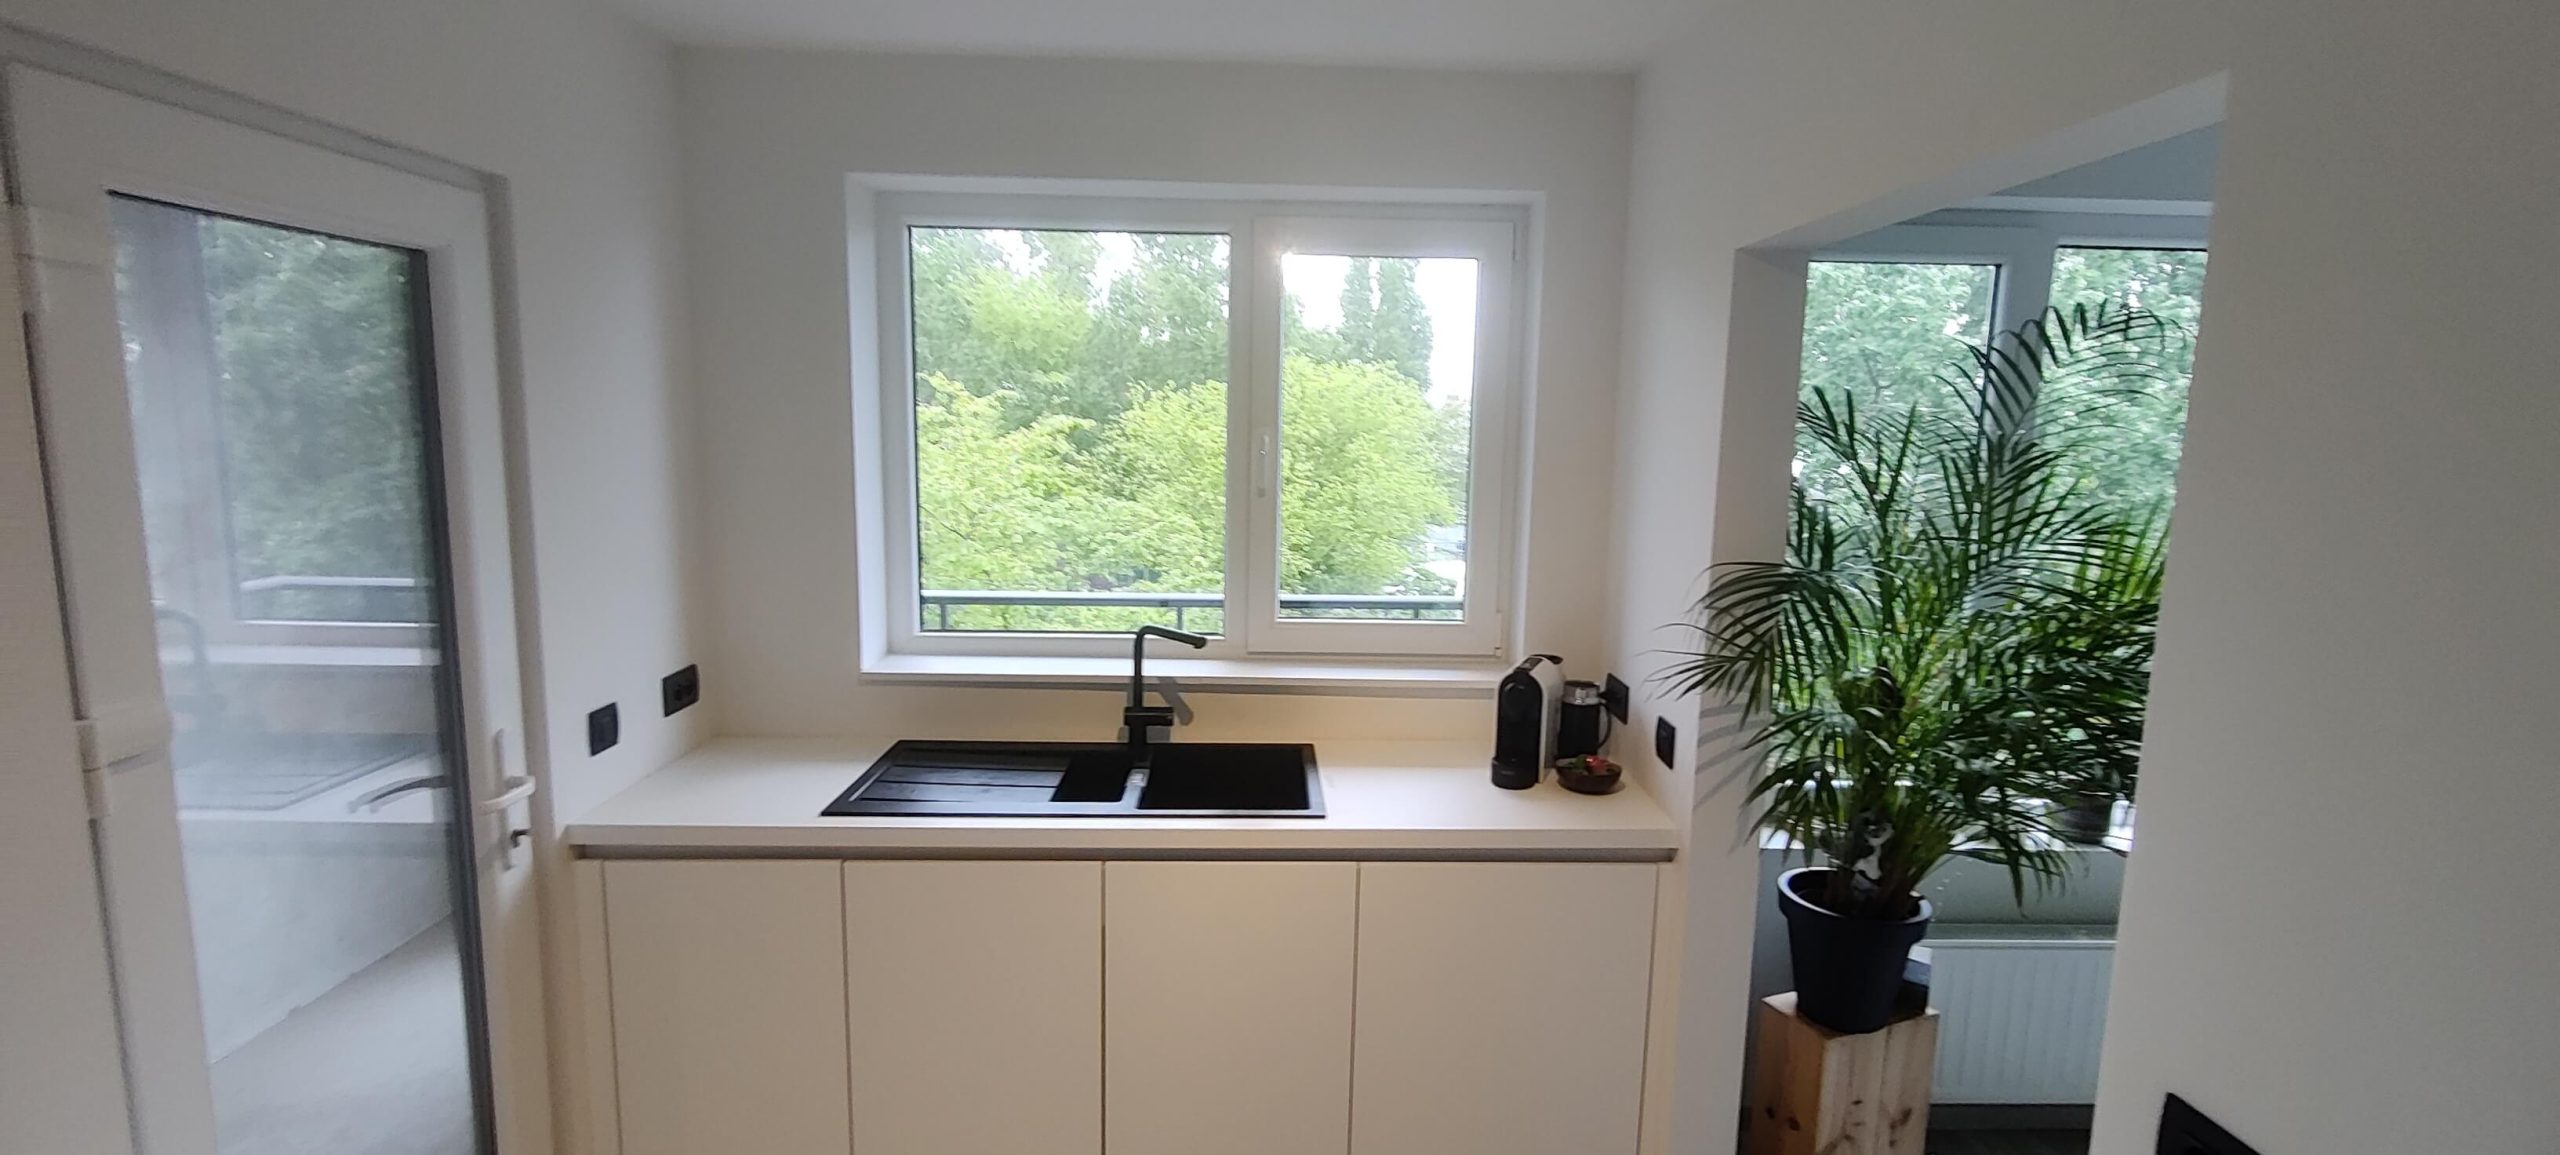 aparment for rent in Ghent - kitchen